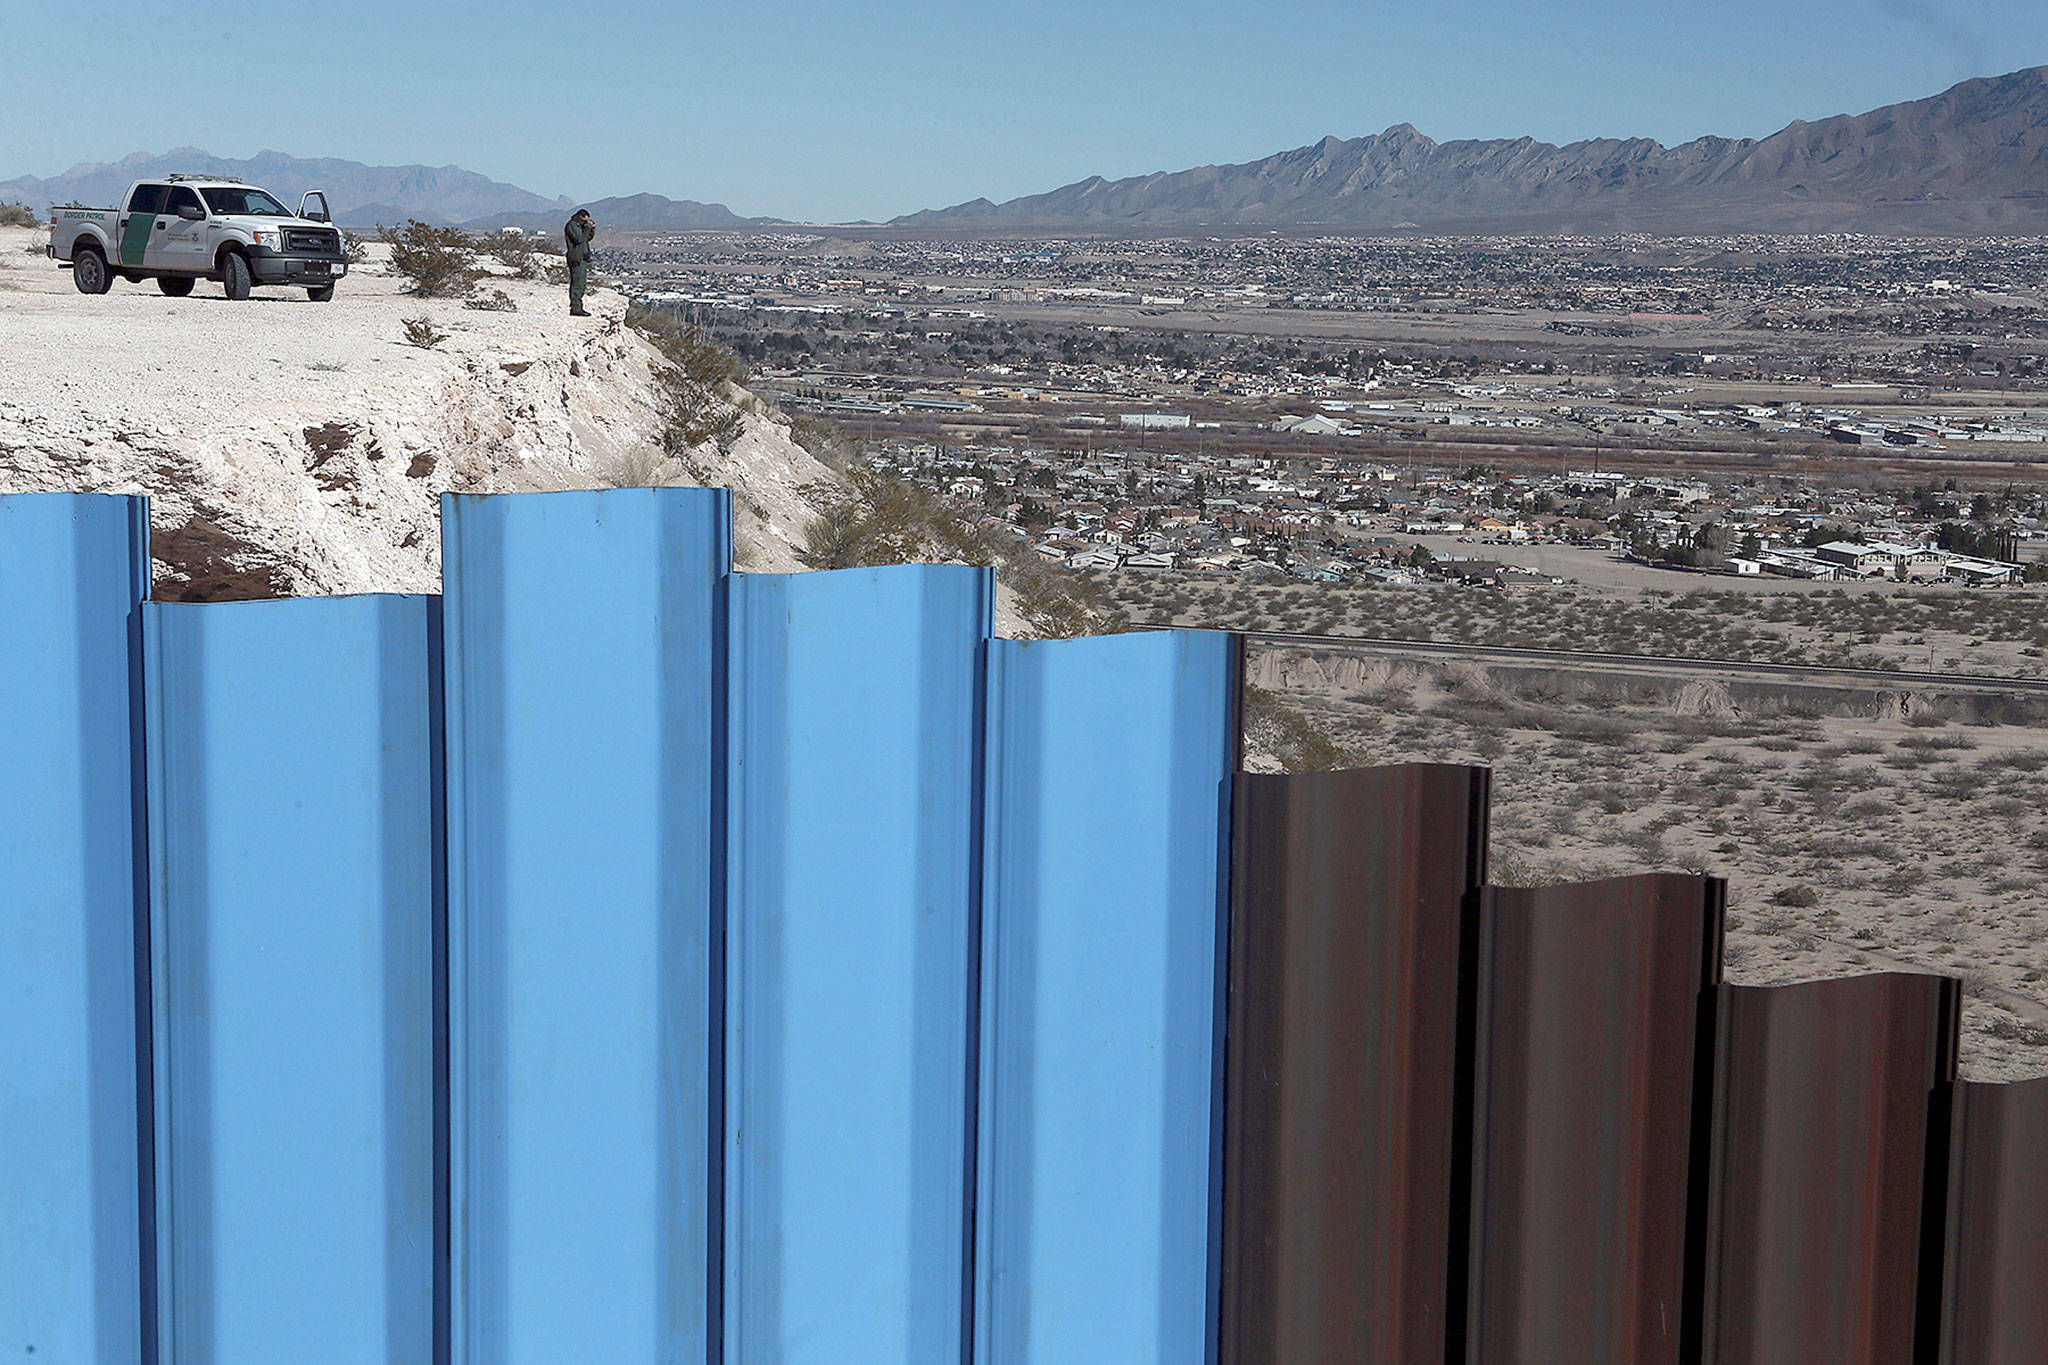 An agent from the border patrol observes near the Mexico-US border fence separating the towns of Anapra, Mexico, and Sunland Park, New Mexico. (AP Photo/Christian Torres, File)